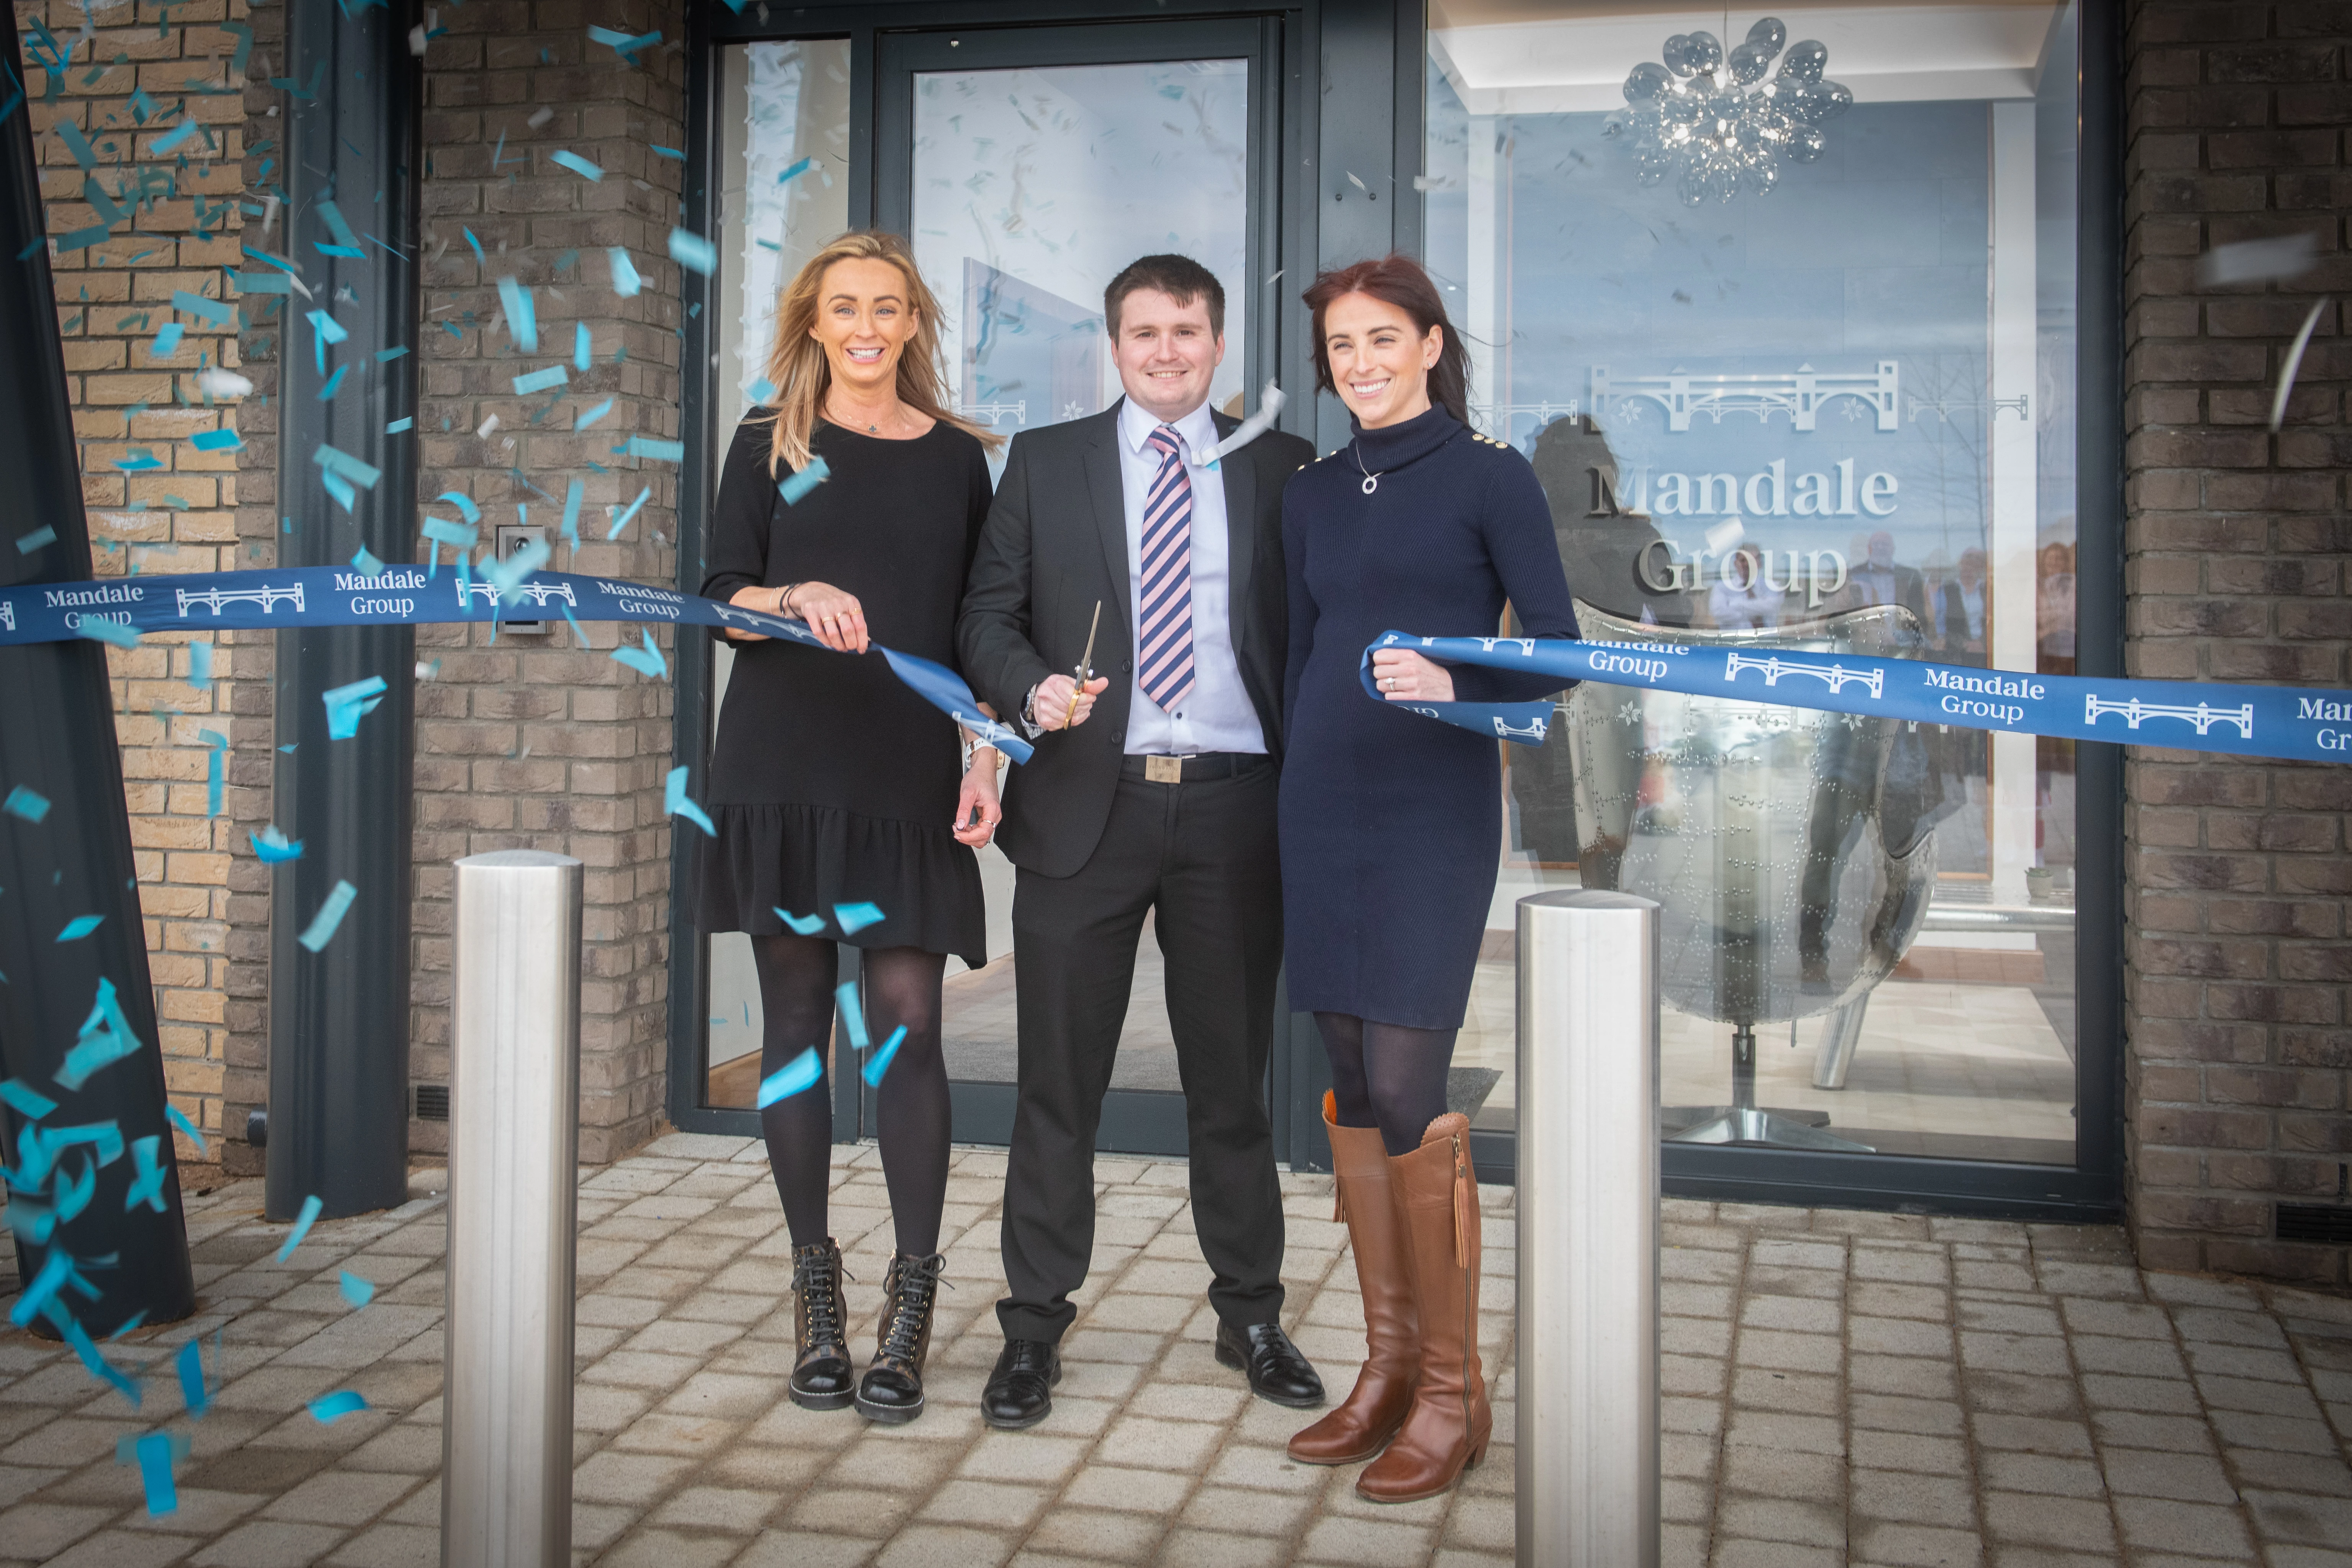 Sales director Helen Woods, commercial estate manager Rob Harriman and commercial manager Harriet Spalding from Mandale Group